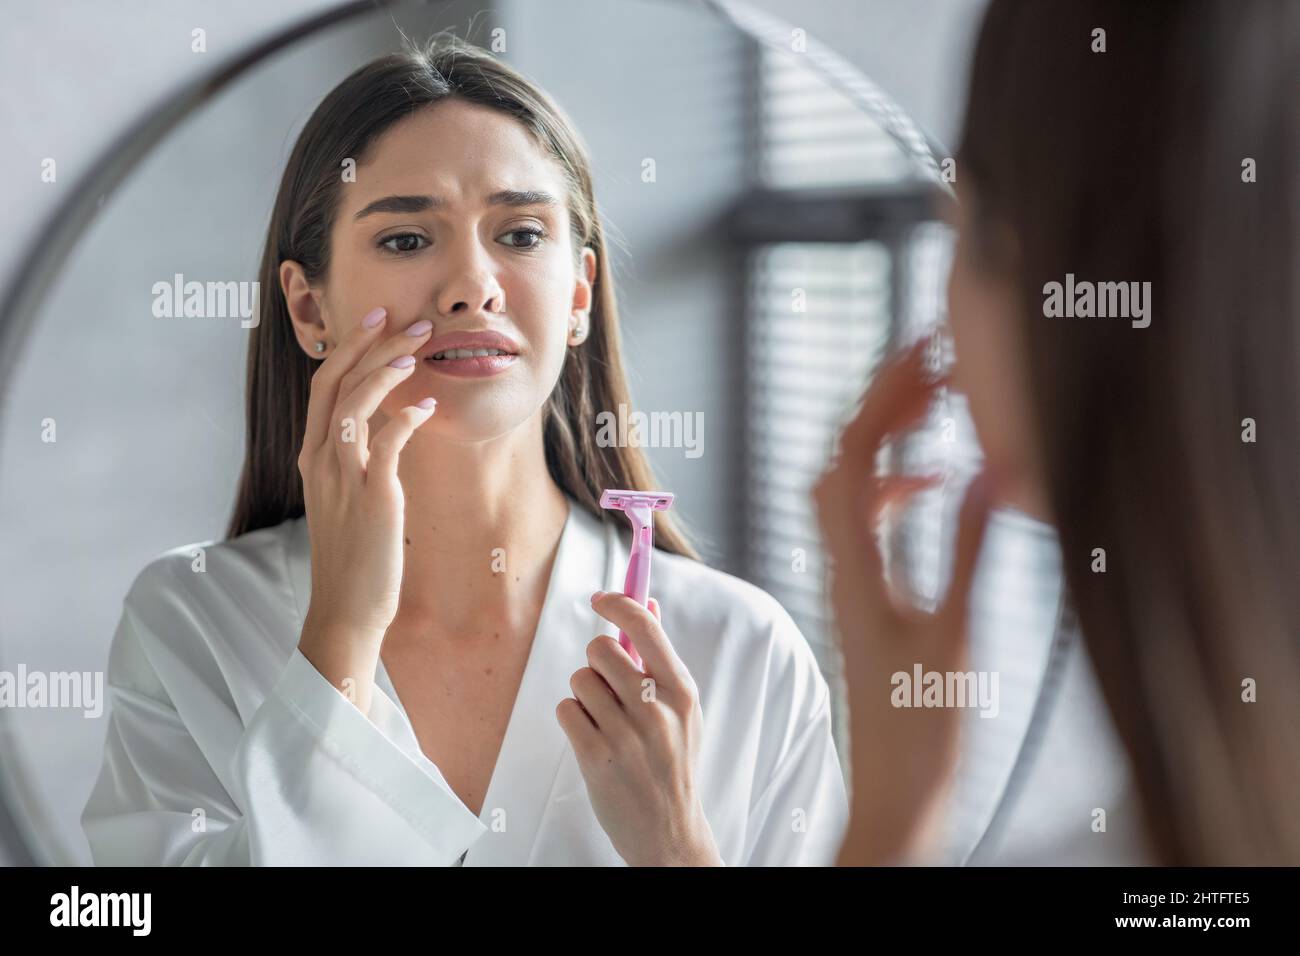 Face Hair Depilation. Confused Lady With Razor In Hand Looking At Mirror Stock Photo